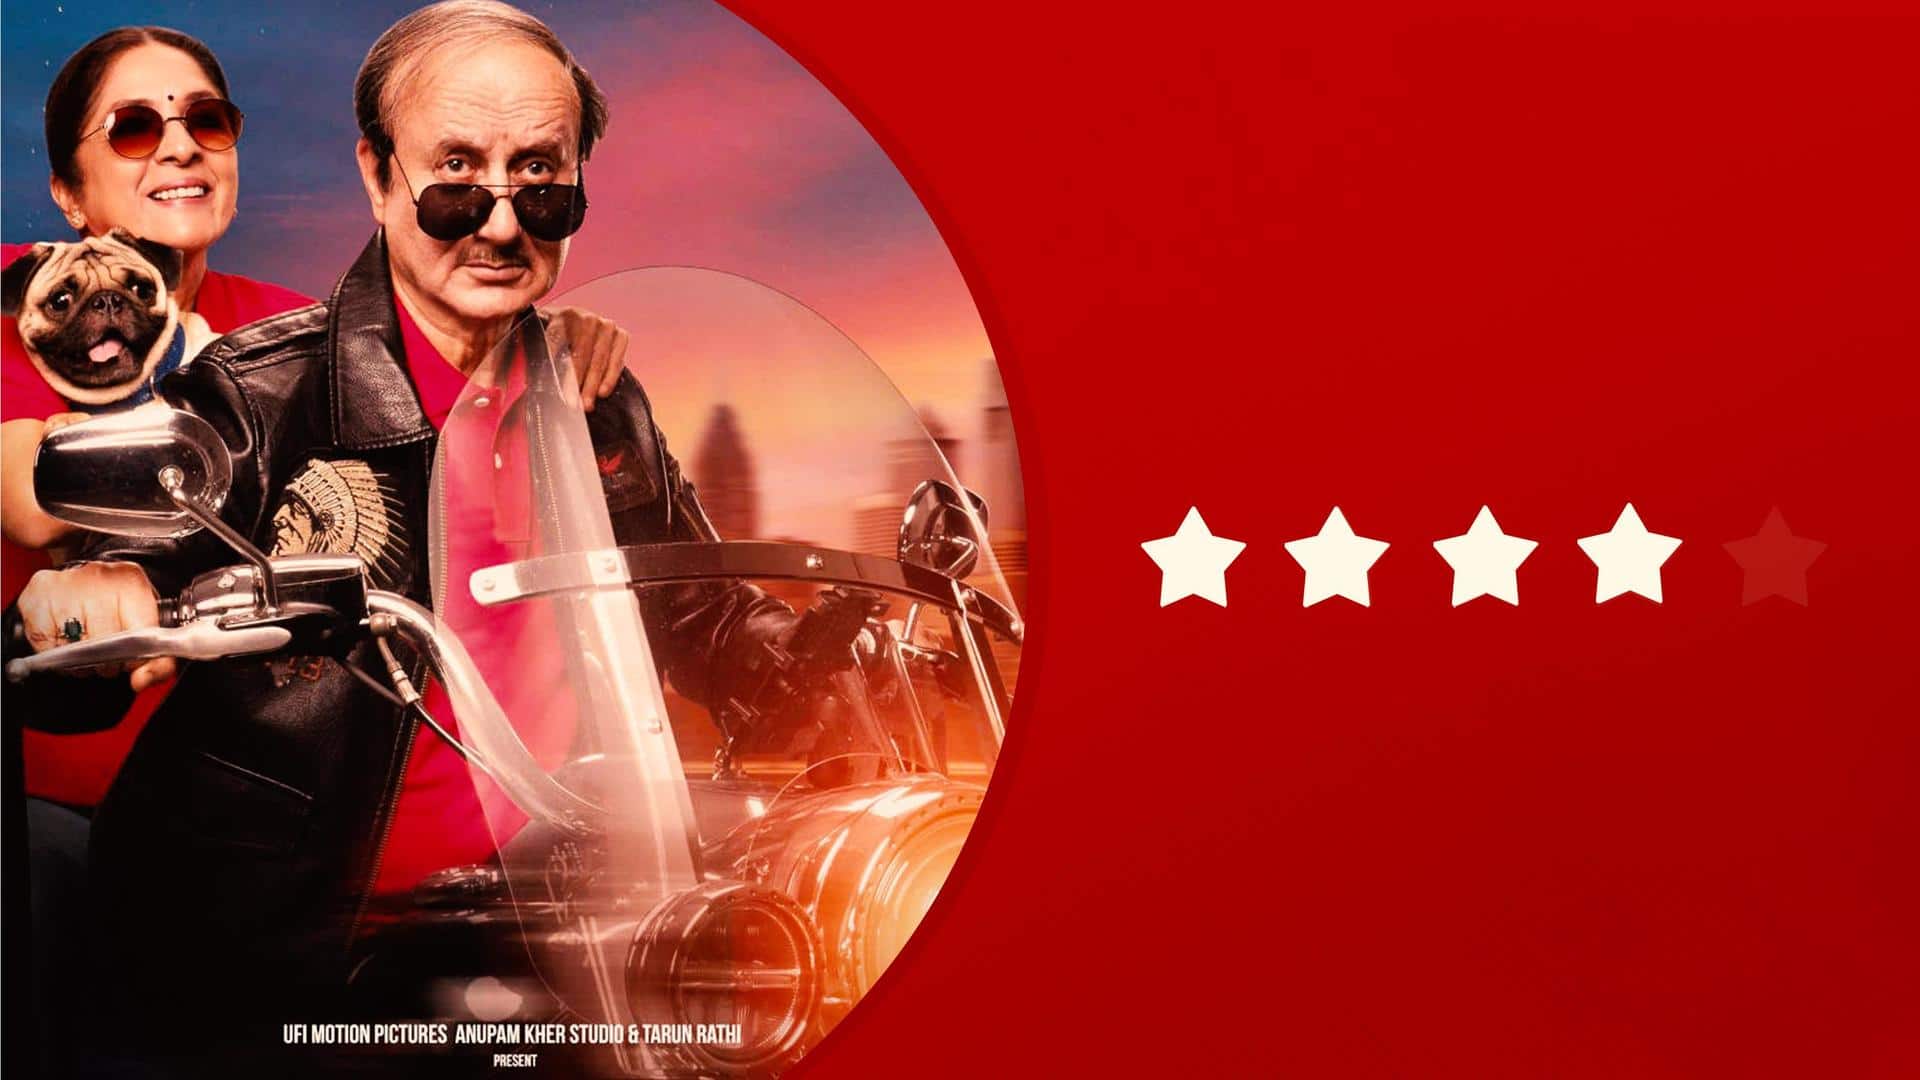 'Shiv Shastri Balboa' review: Don't miss this heart-warming Anupam Kher-starrer!